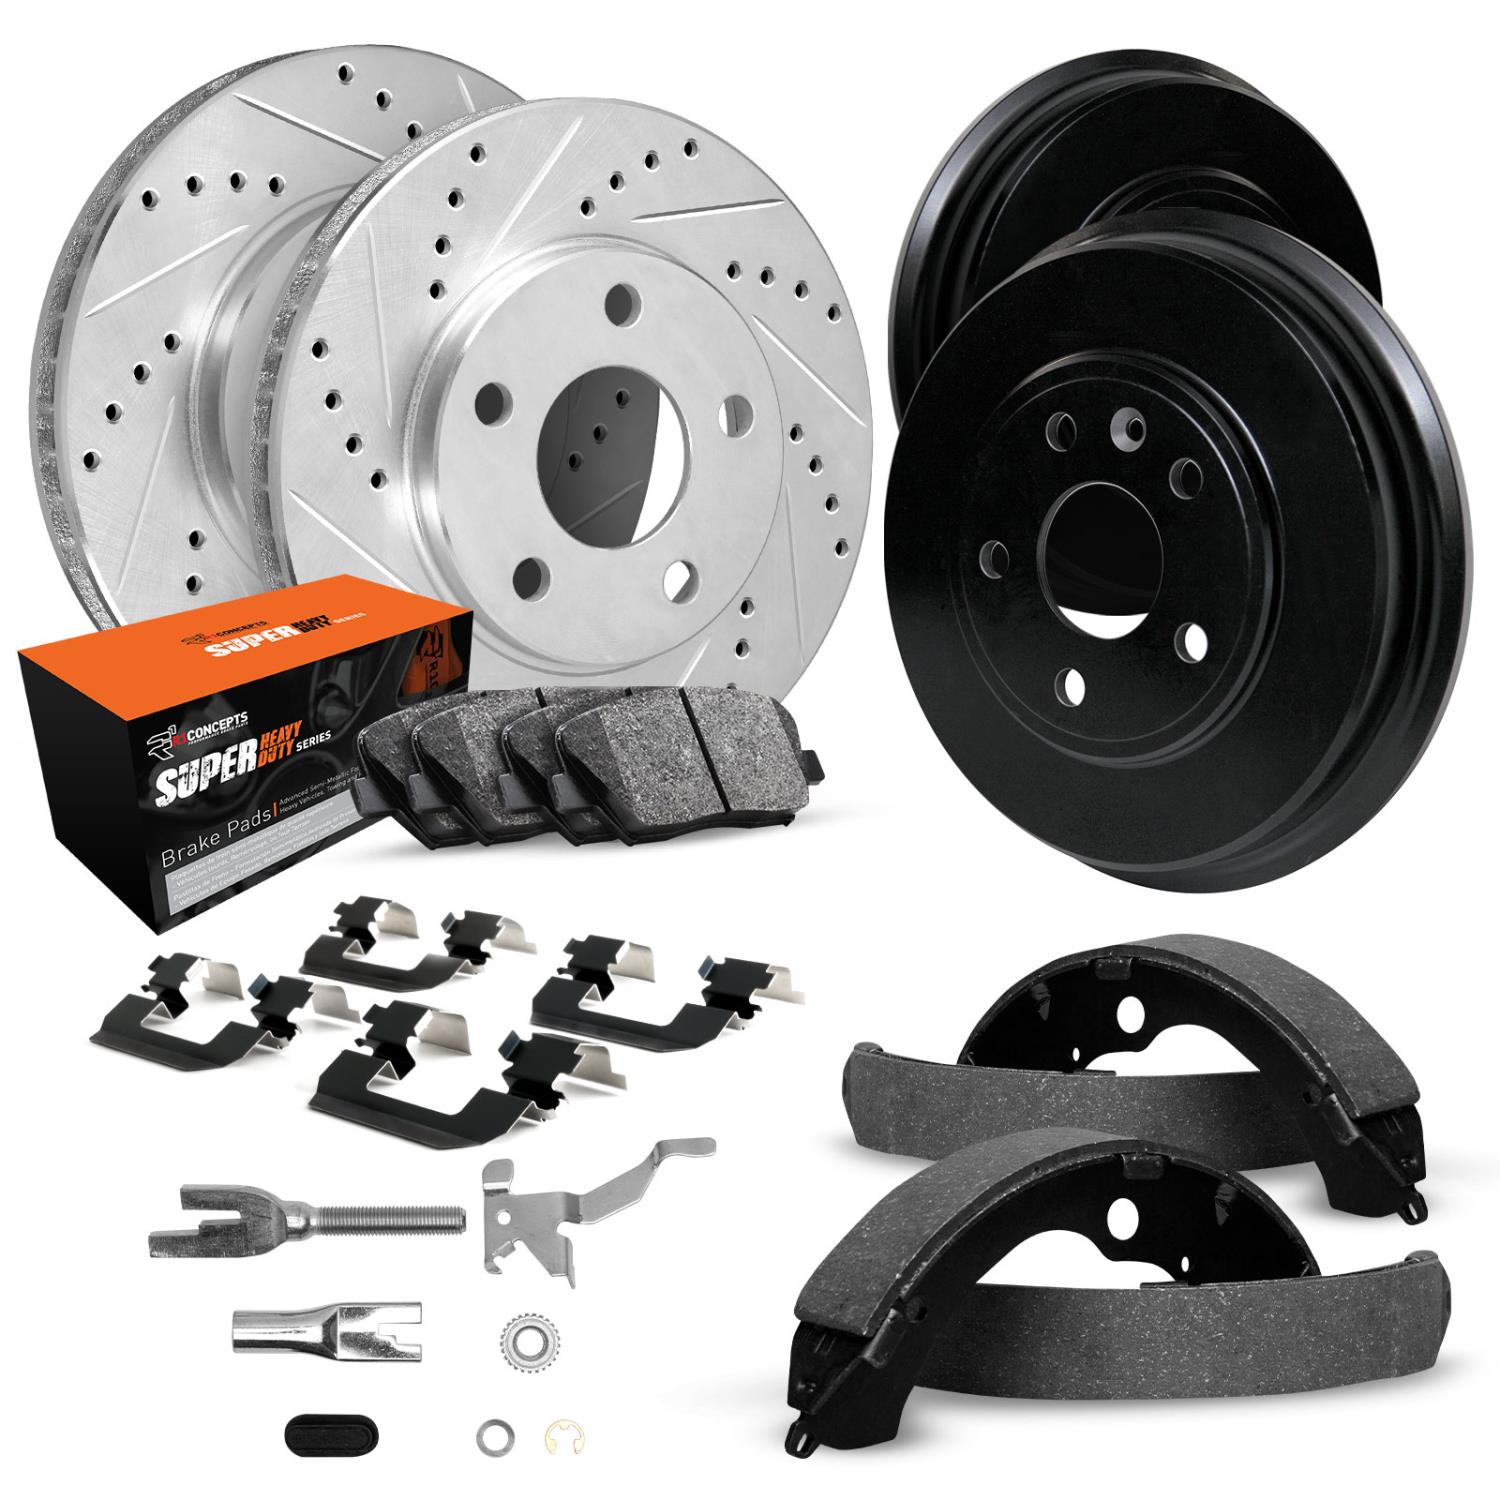 E-Line Drilled/Slotted Silver Rotor & Drum Set w/Super-Duty Pads, Shoes/Hardware/Adjusters, 1994-1996 Ford/Lincoln/Mercury/Mazda